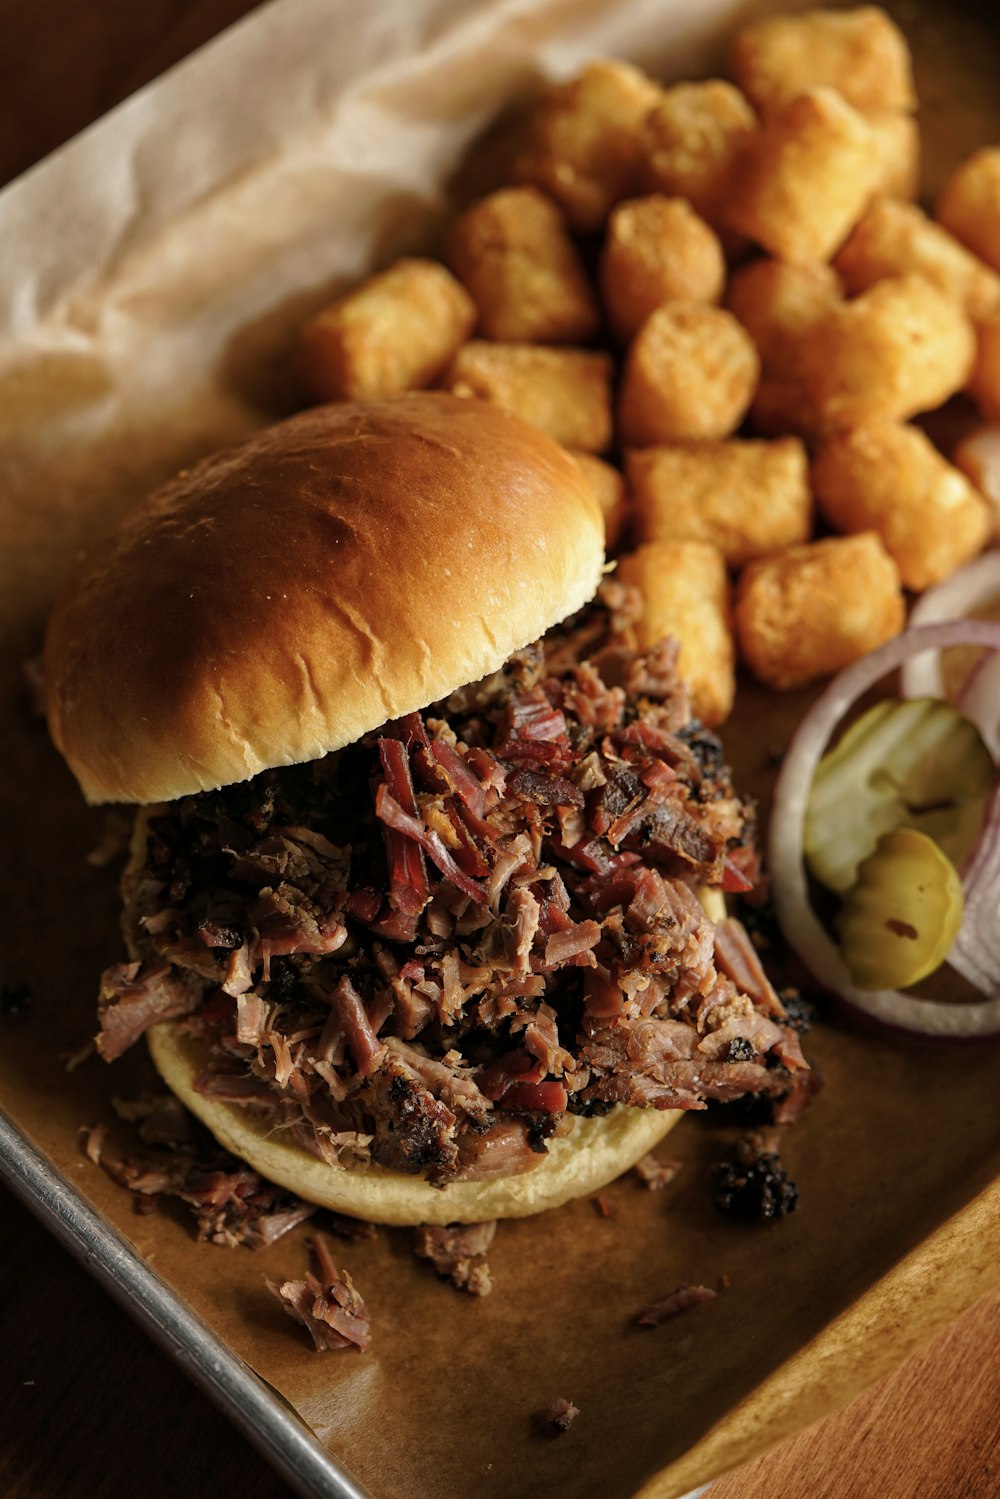 a pulled pork sandwich with a side of tater tots